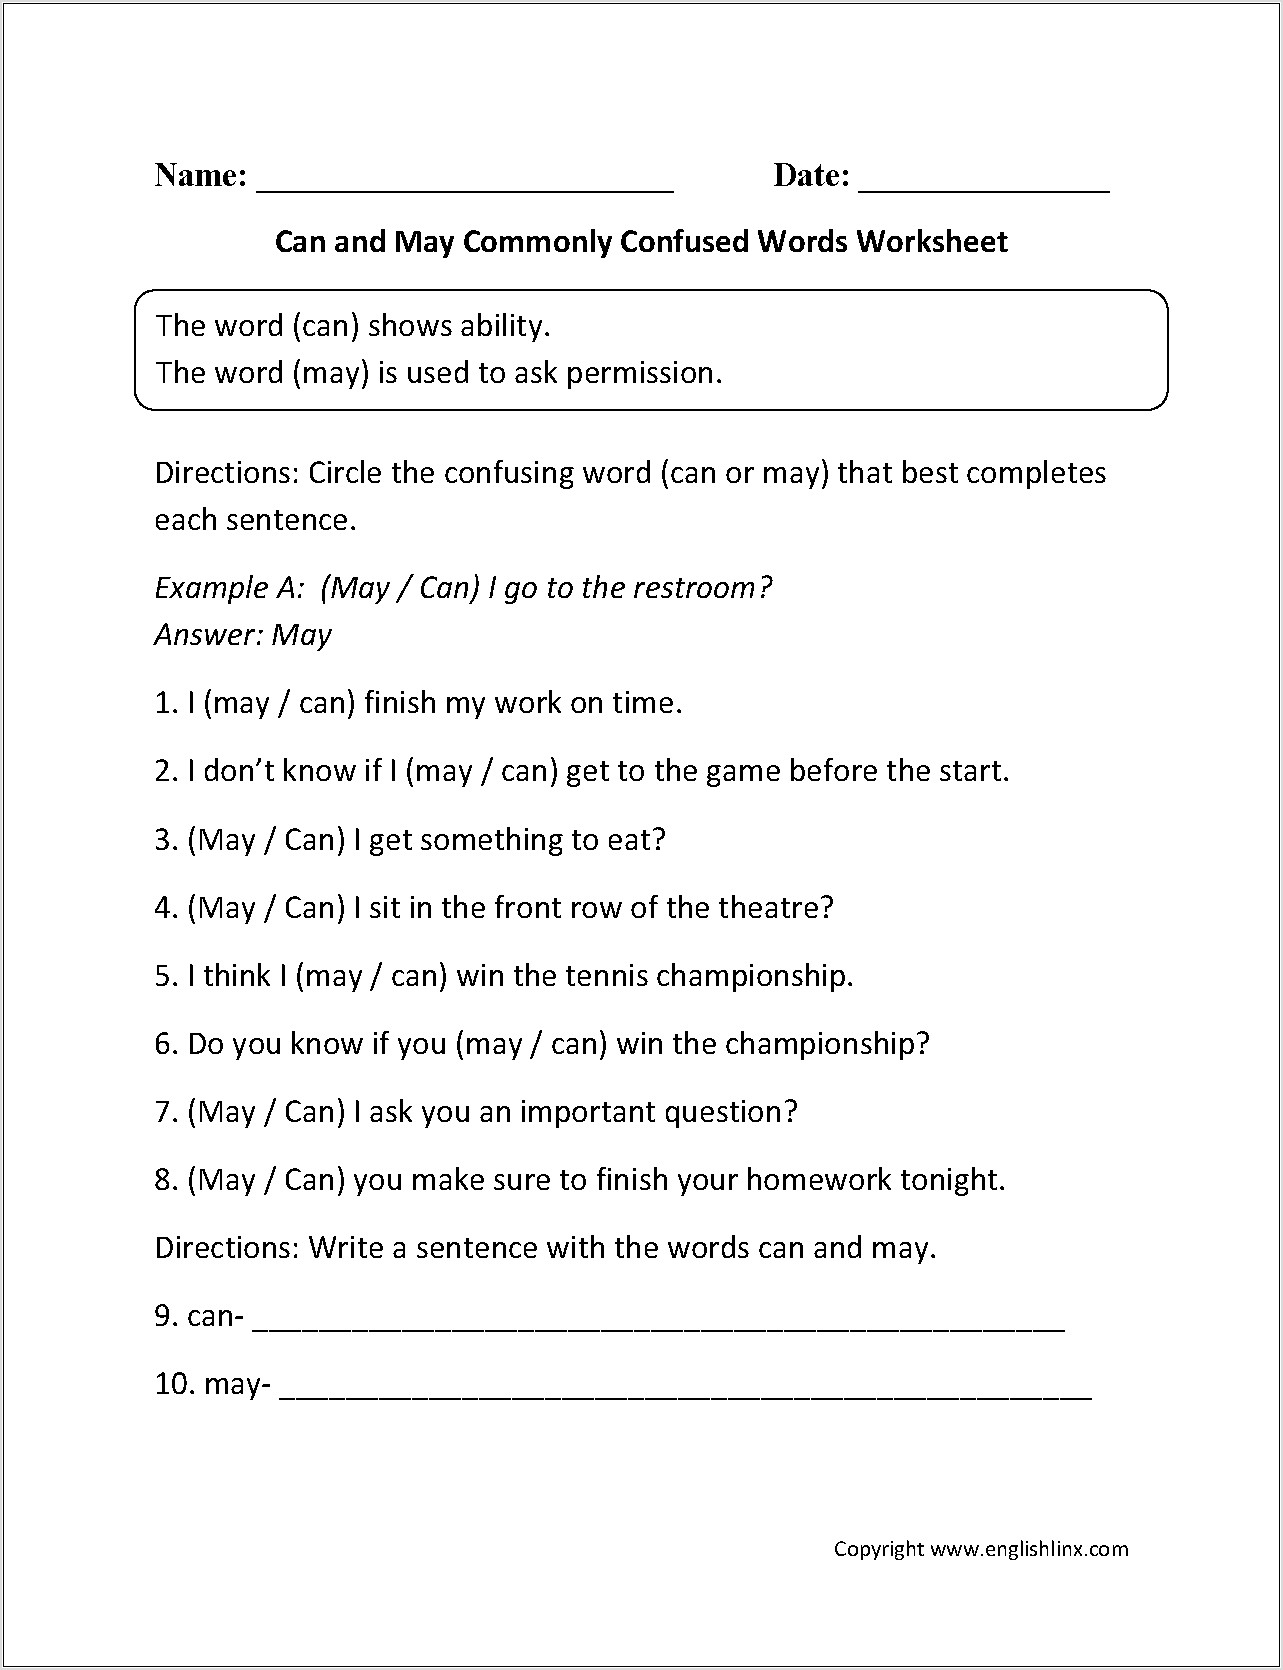 Words Commonly Confused Worksheet Answer Key